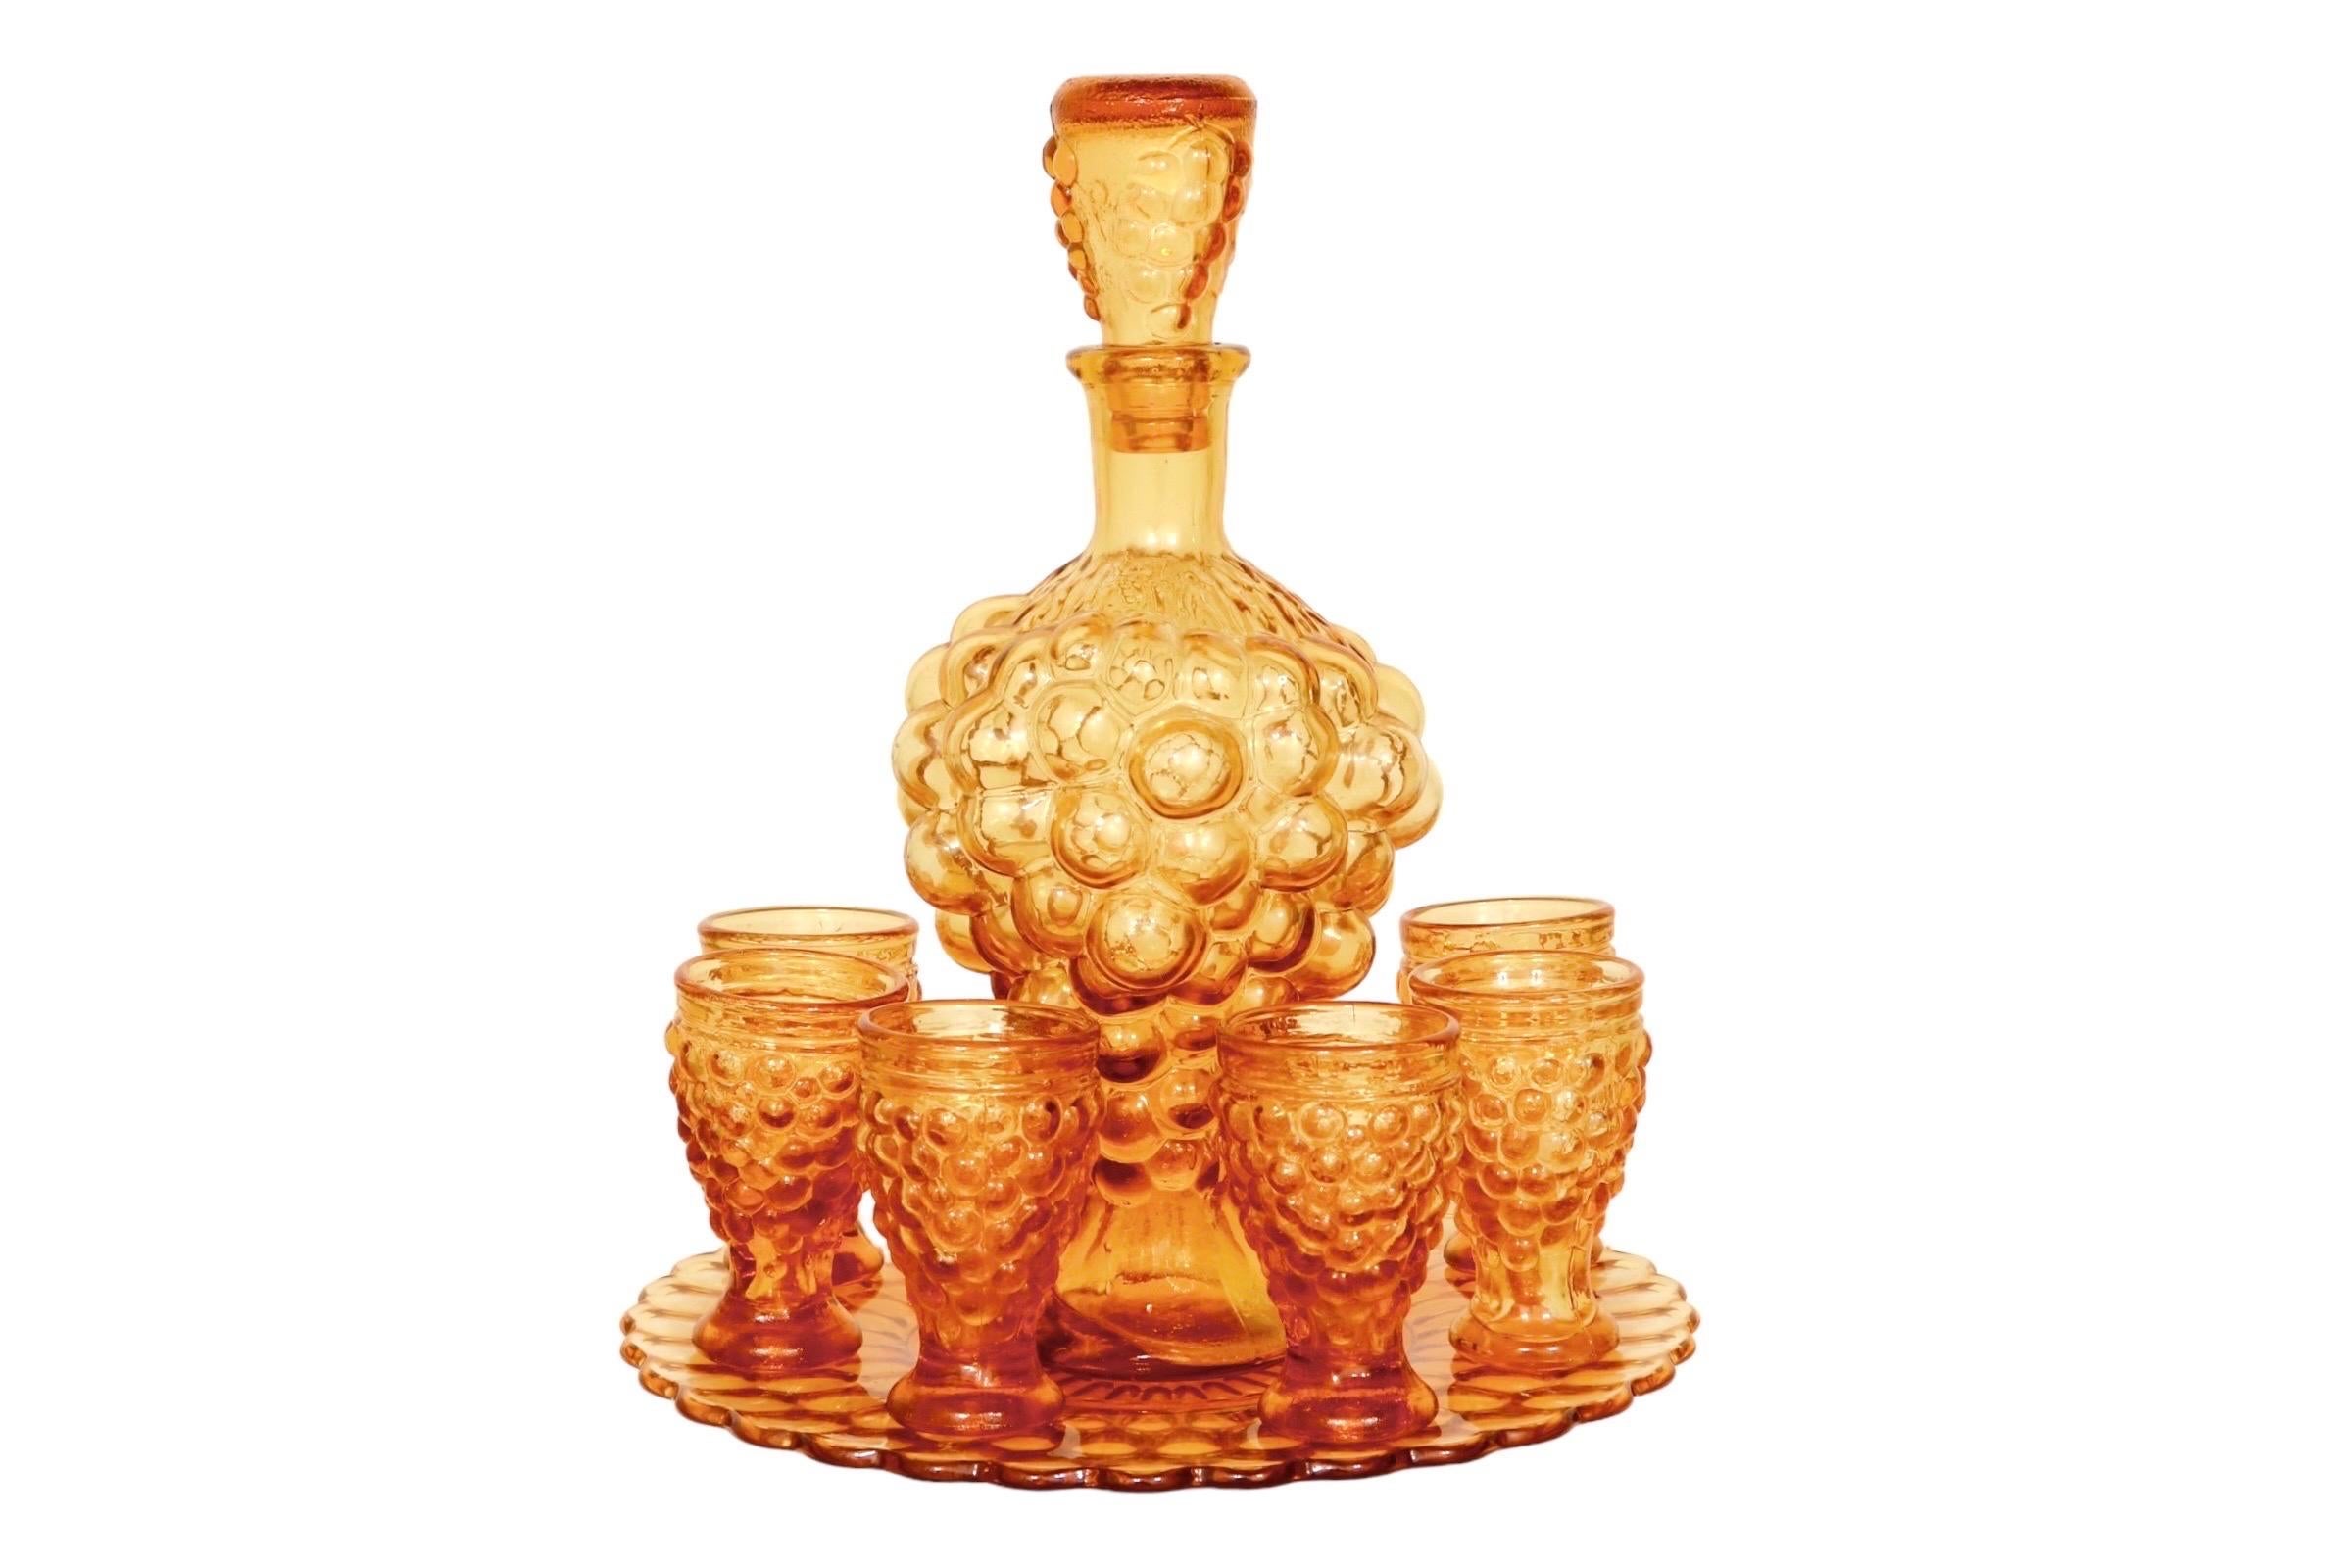 An Italian amber glass decanter set with six glasses and a serving plate. The decanter is pressed in a bubble-like bunch of grapes. The bubble motif is repeated on the decanter stopper, six glasses, and the underside of the plate.